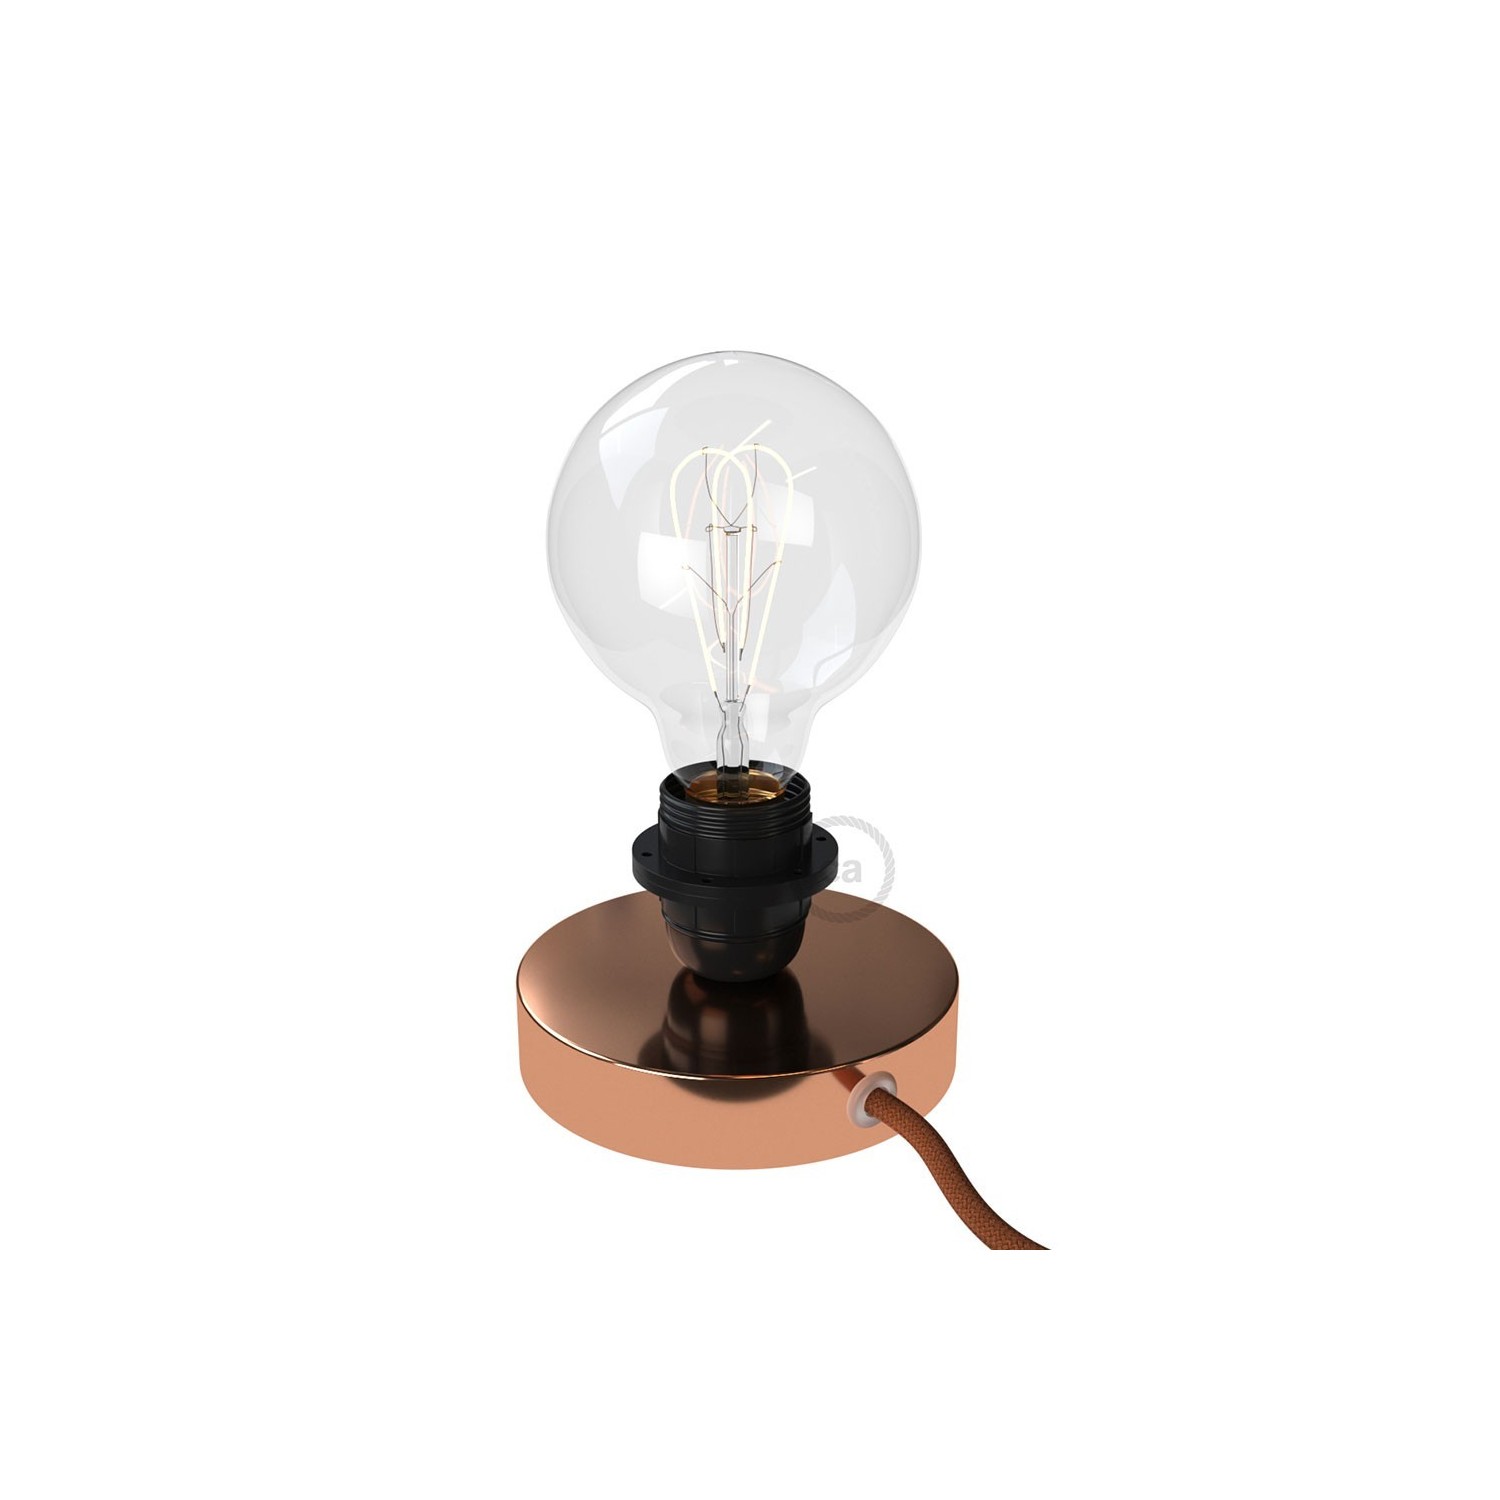 Posaluce, the coppered metal table lamp for lampshade, with textile cable, in-line switch and english plug